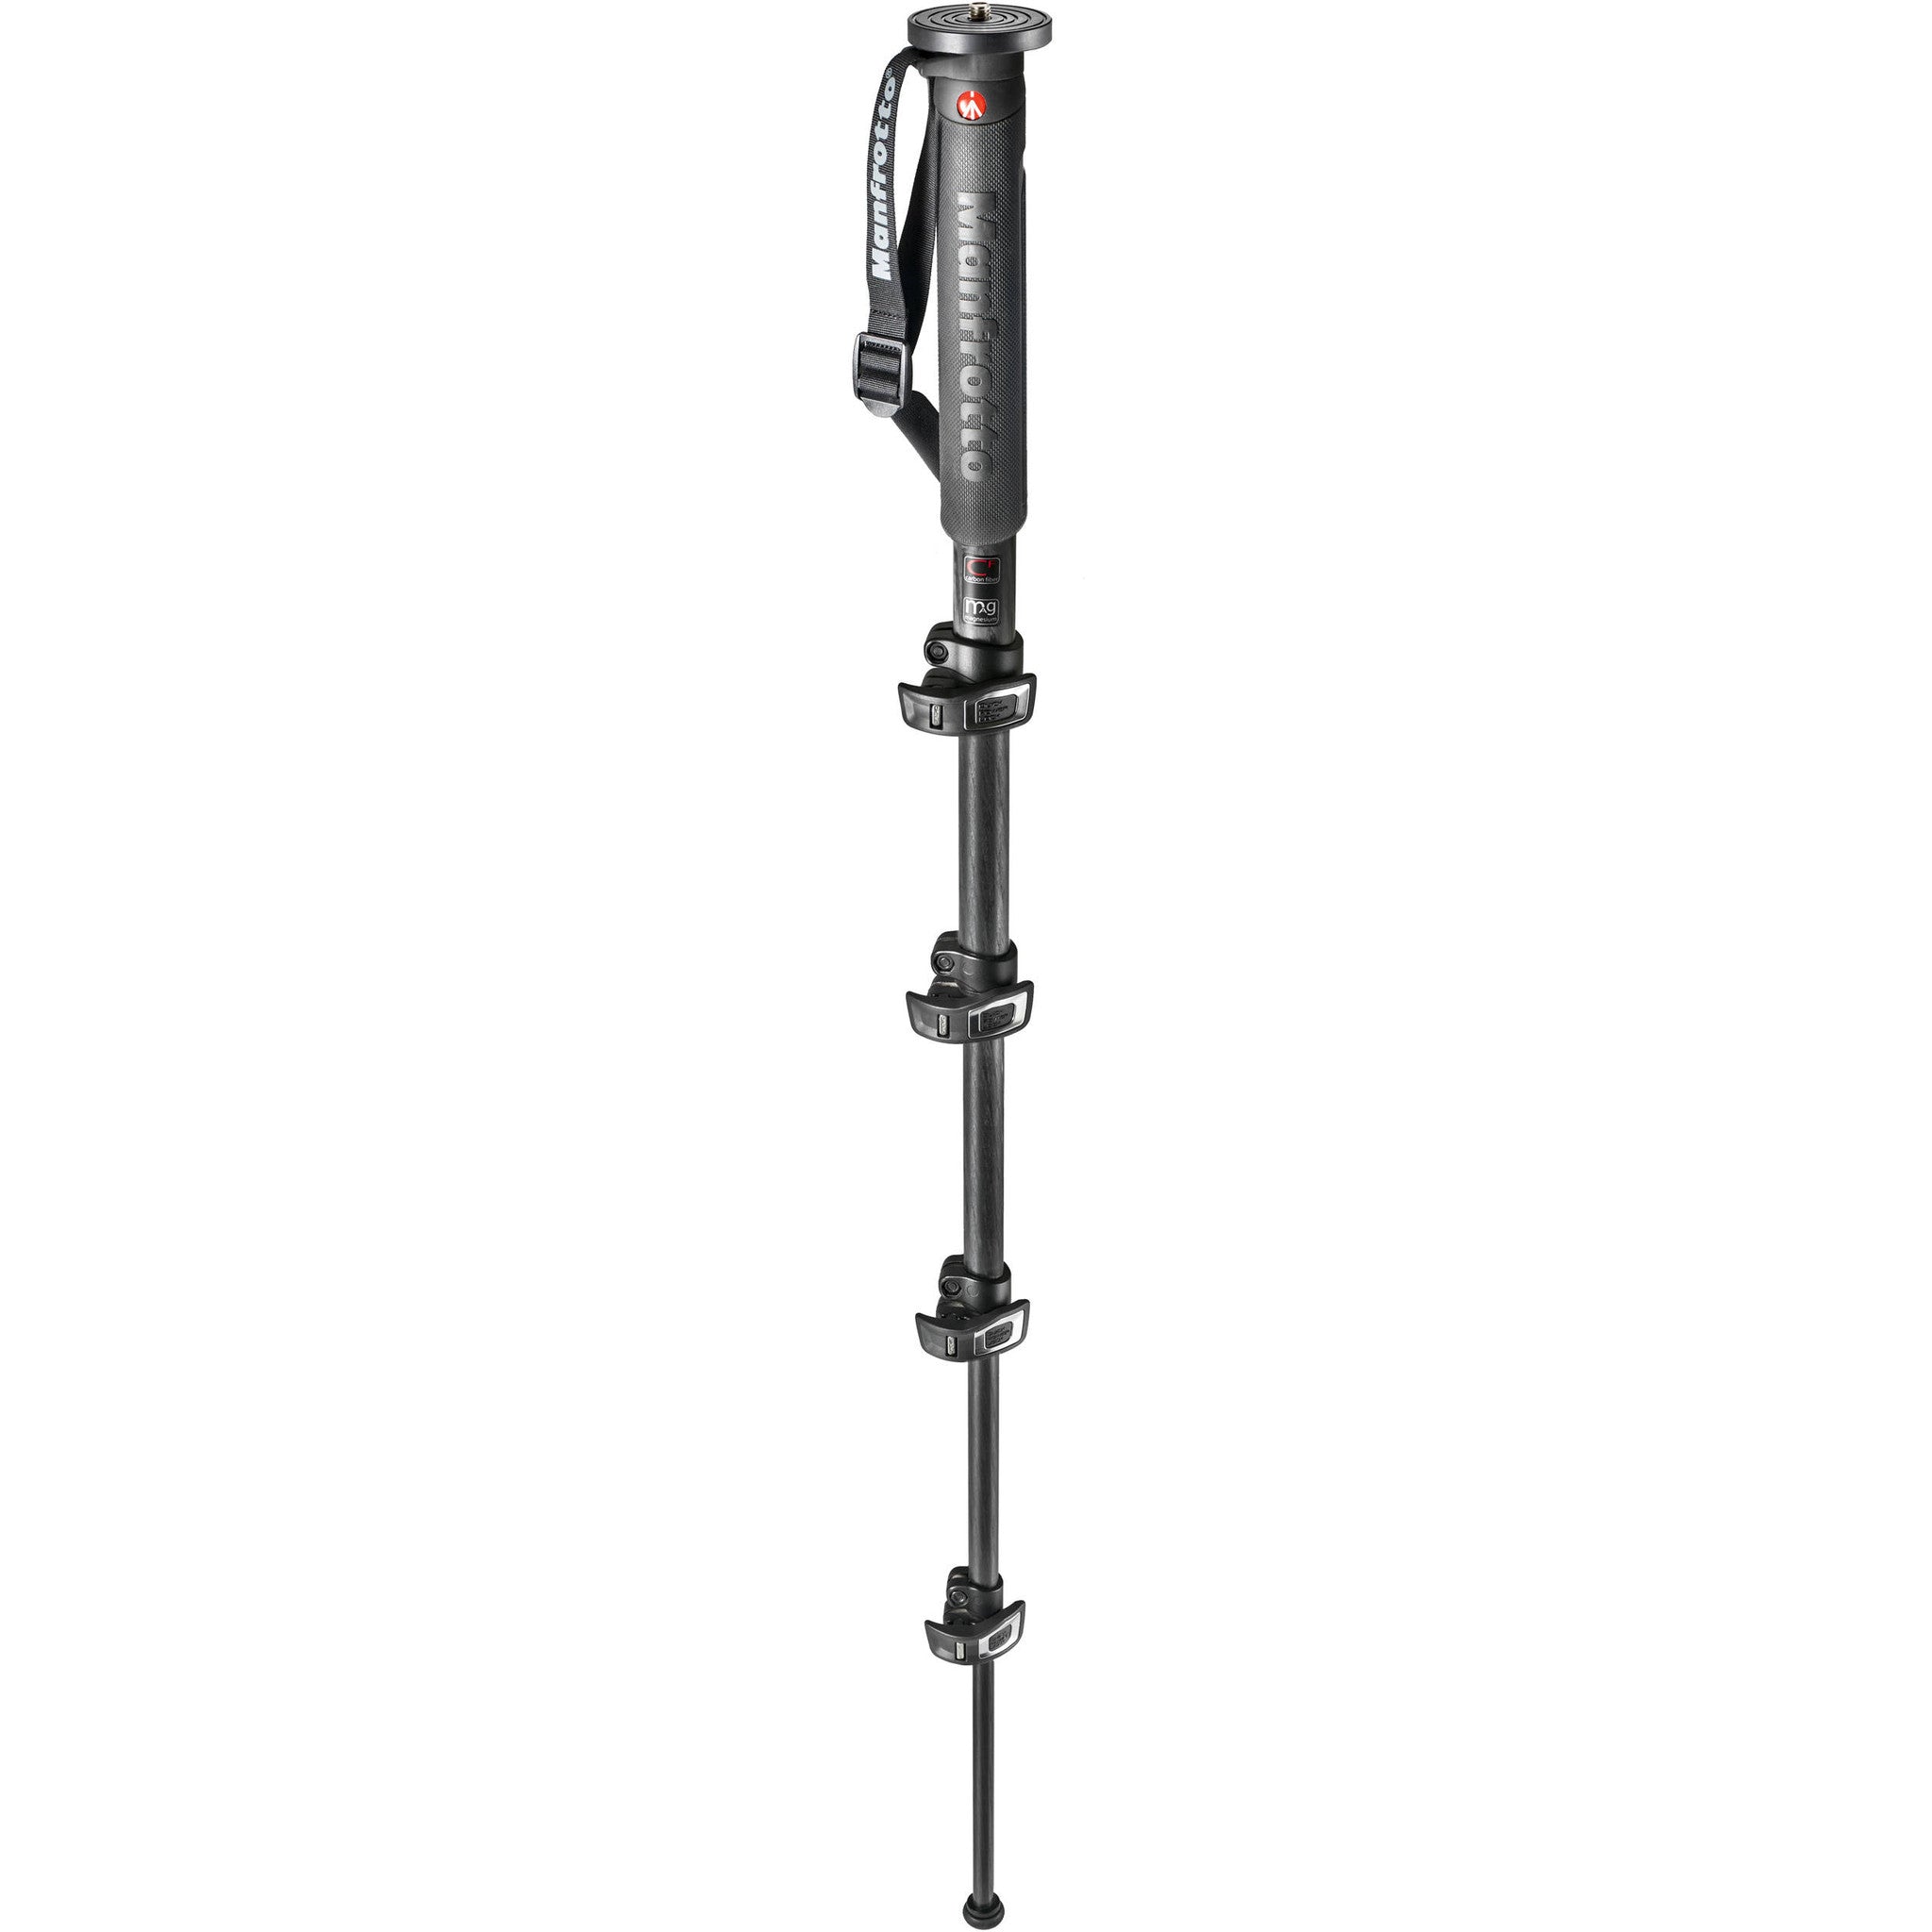 Manfrotto MMXPROC5US 5-Section Carbon Fiber Monopod, discontinued, Manfrotto - Pictureline 